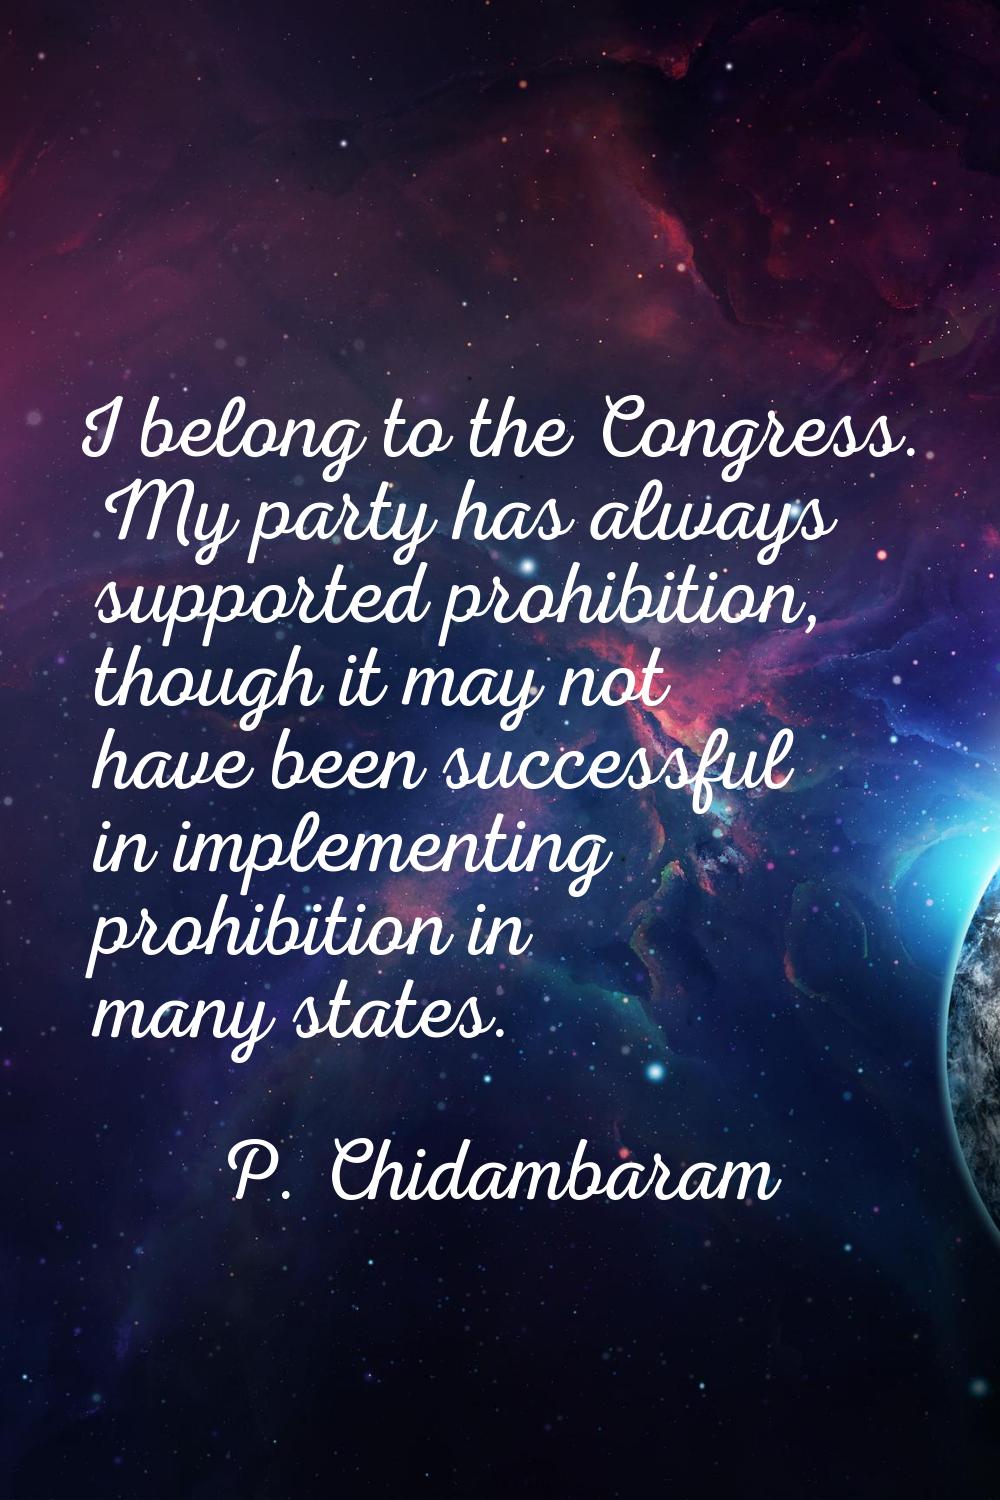 I belong to the Congress. My party has always supported prohibition, though it may not have been su